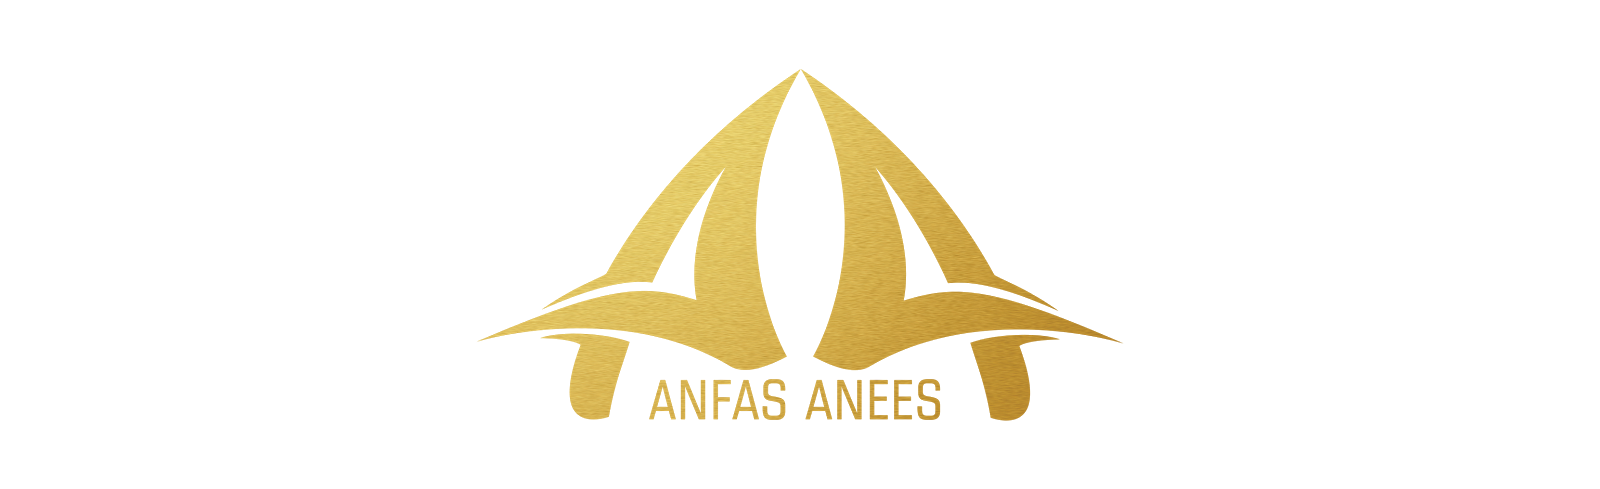 Anfas Anees